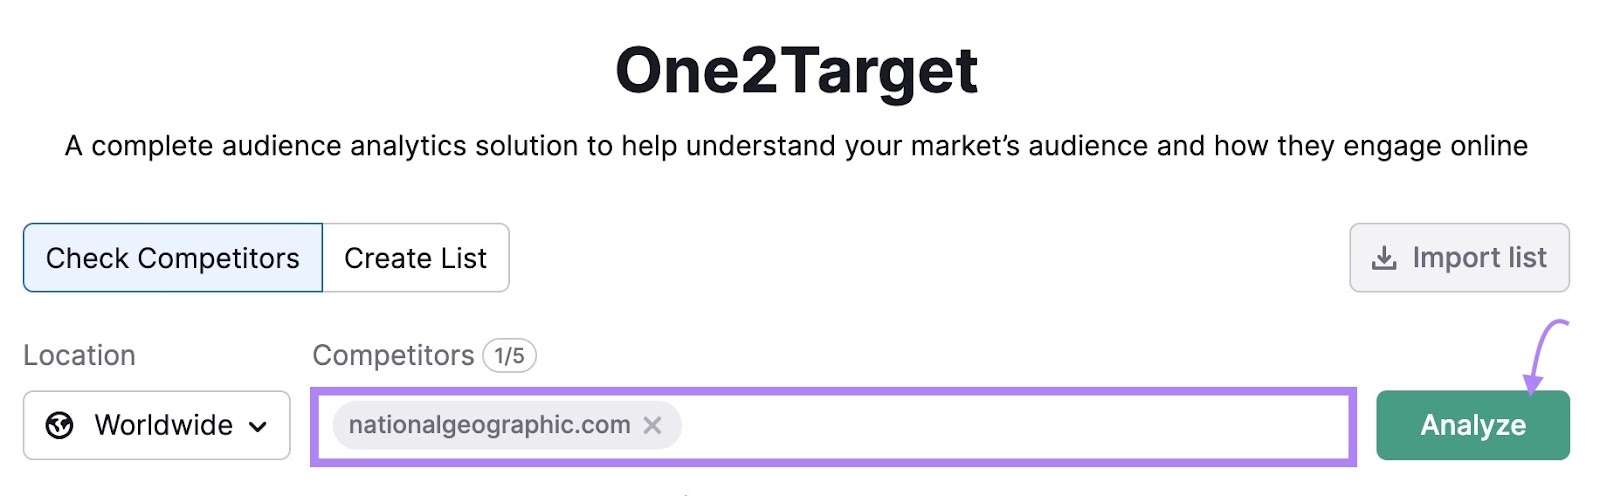 One2Target search with 'nationalgeographic.com' entered and 'Analyze' selected.